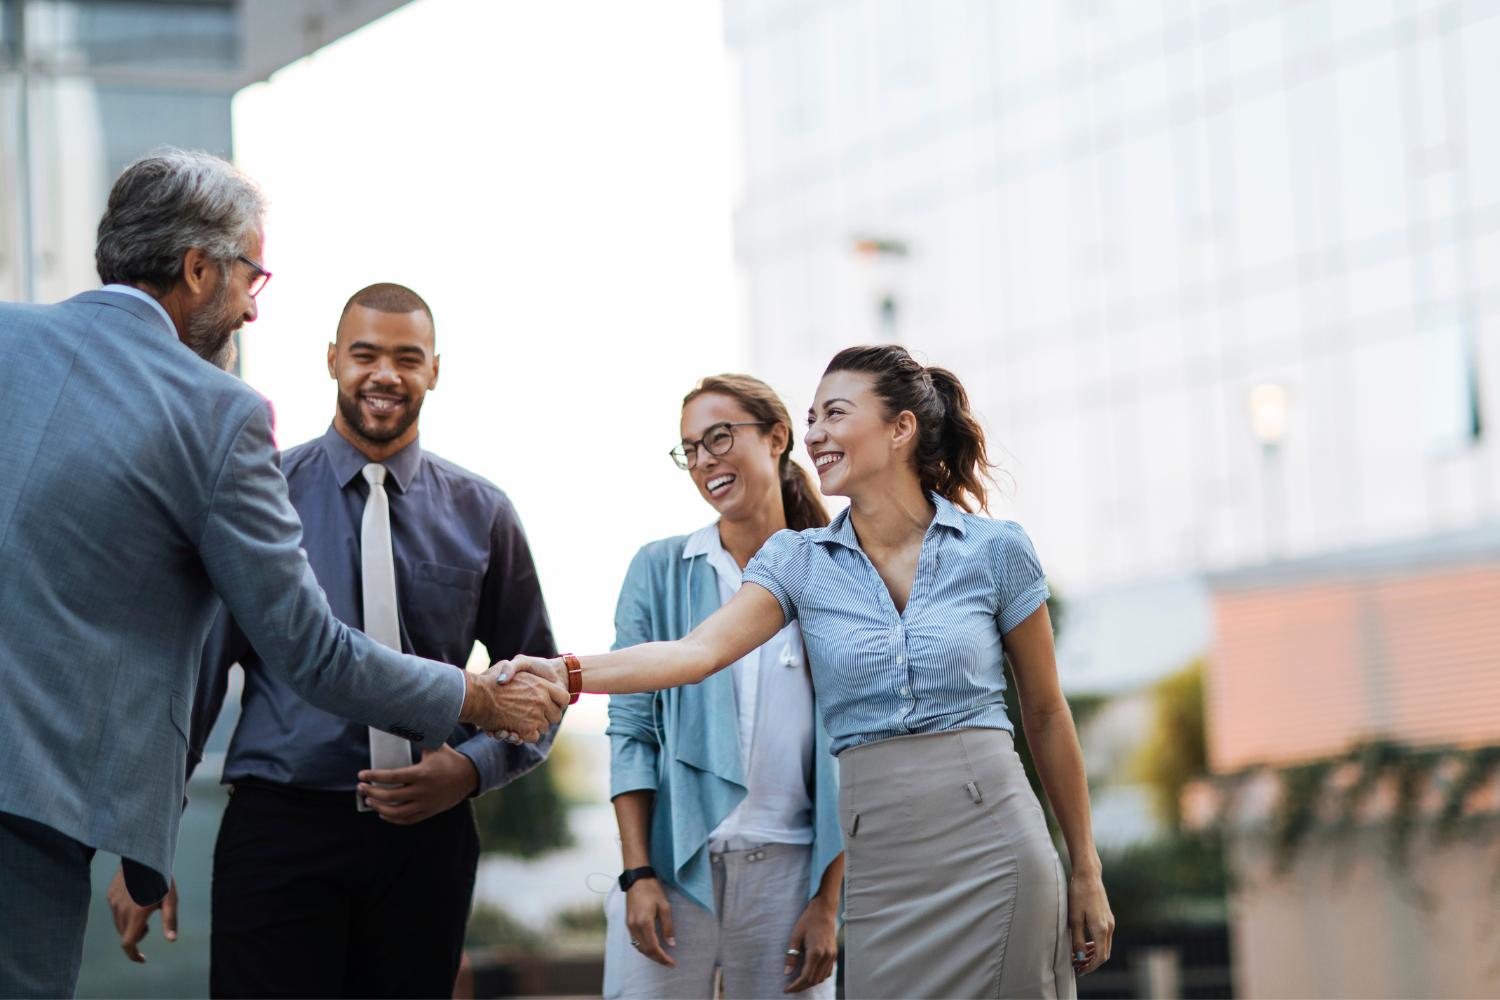 Image of employees smiling and shaking hands